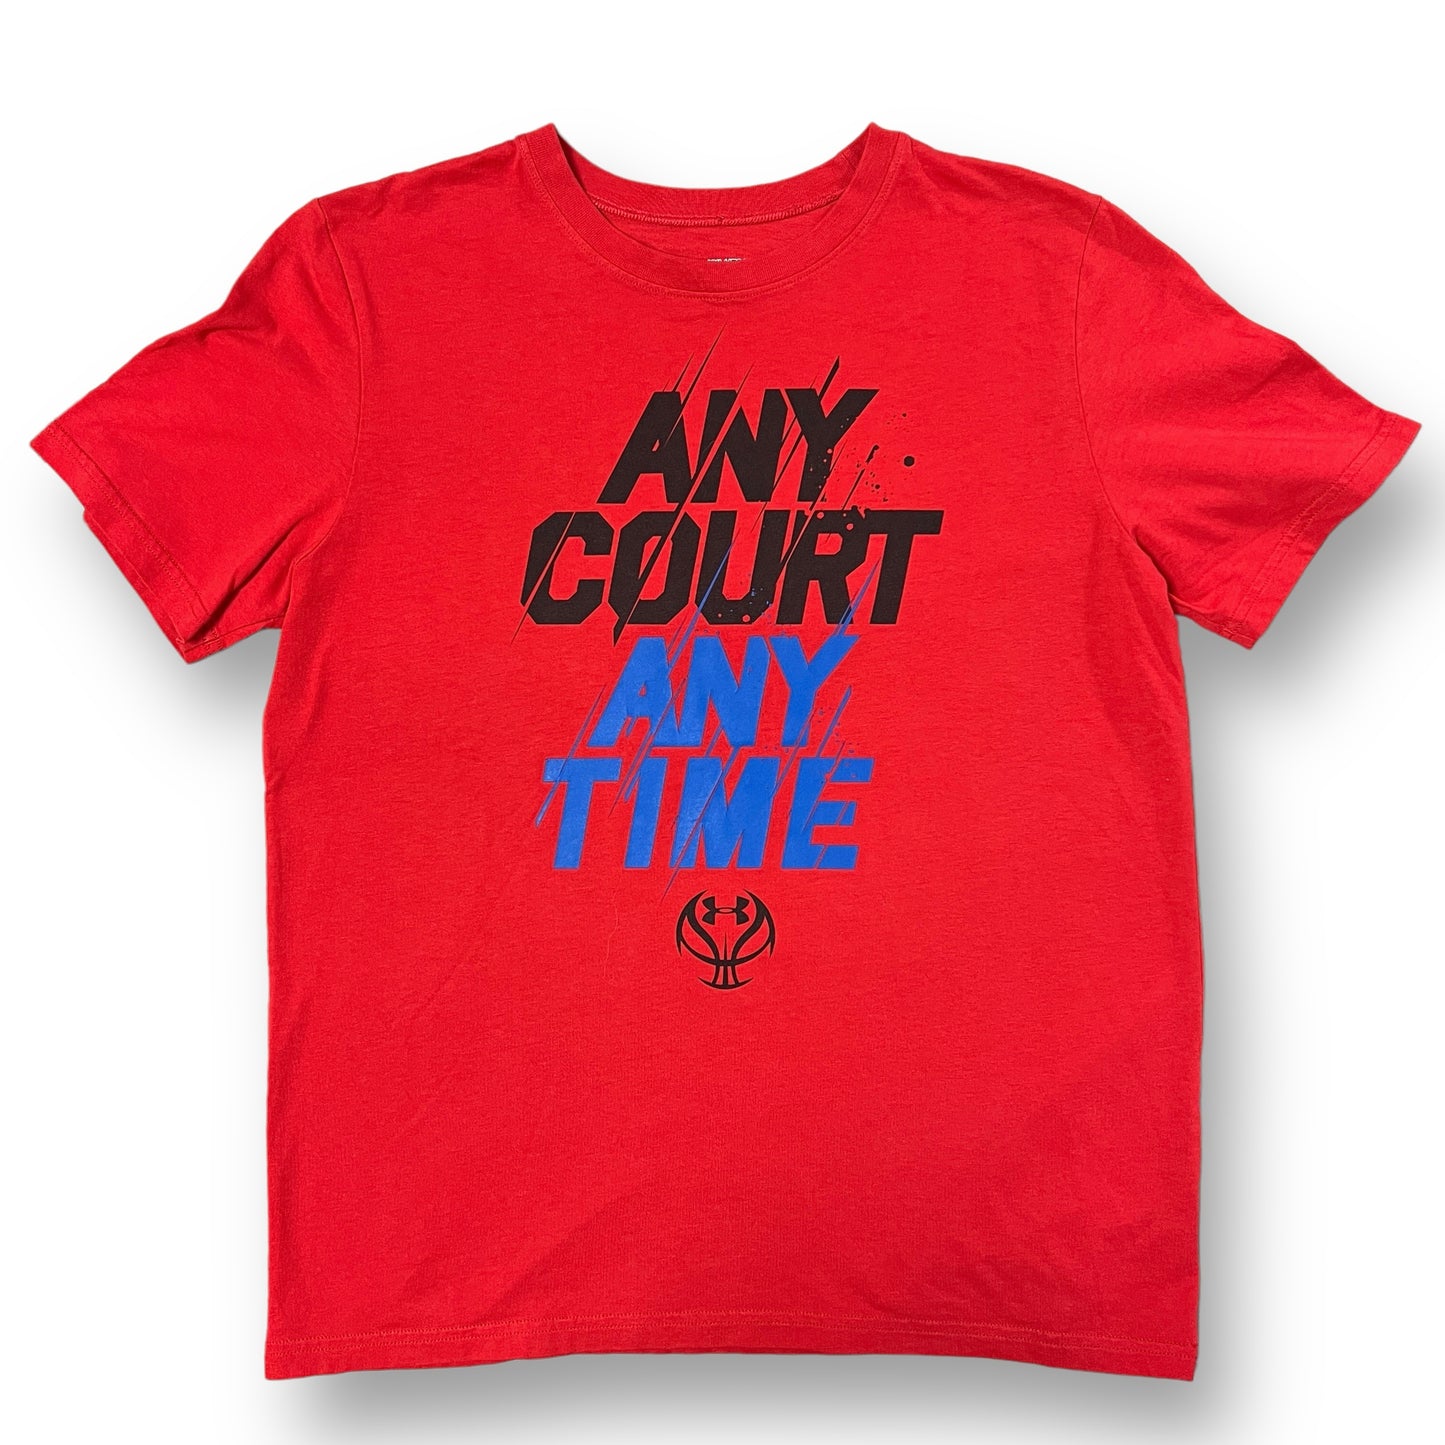 Boys Under Armour Size 14/16 YXL Red 'Any Court' Basketball Tee